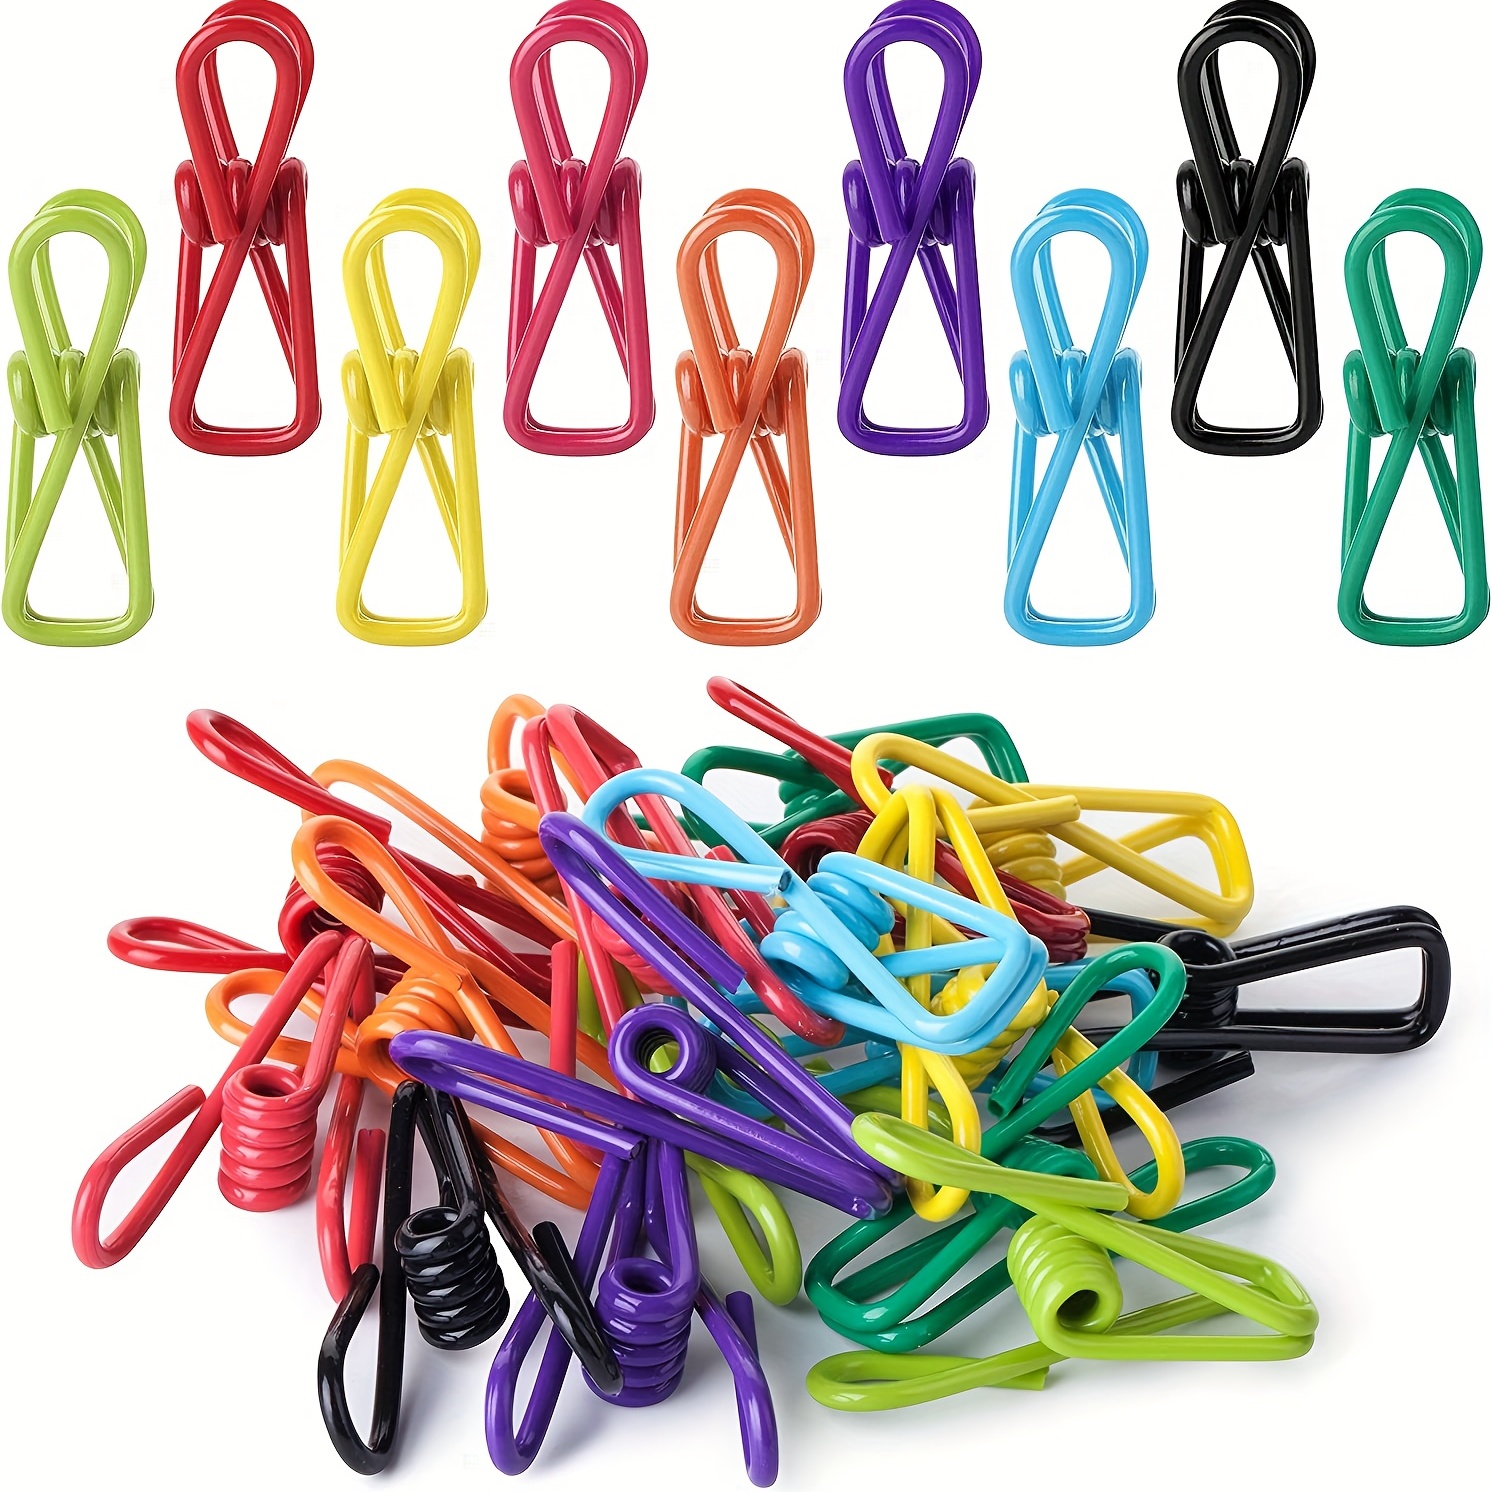 

10pcs/pack Chip Clips, 2 Inches, Assorted Colors, Utility Pvc-coated Clips, Bag Clips, Clips For Food Packages, Food Clips, Bag Clips For Food, Chip Bag Clip ( Color Random)